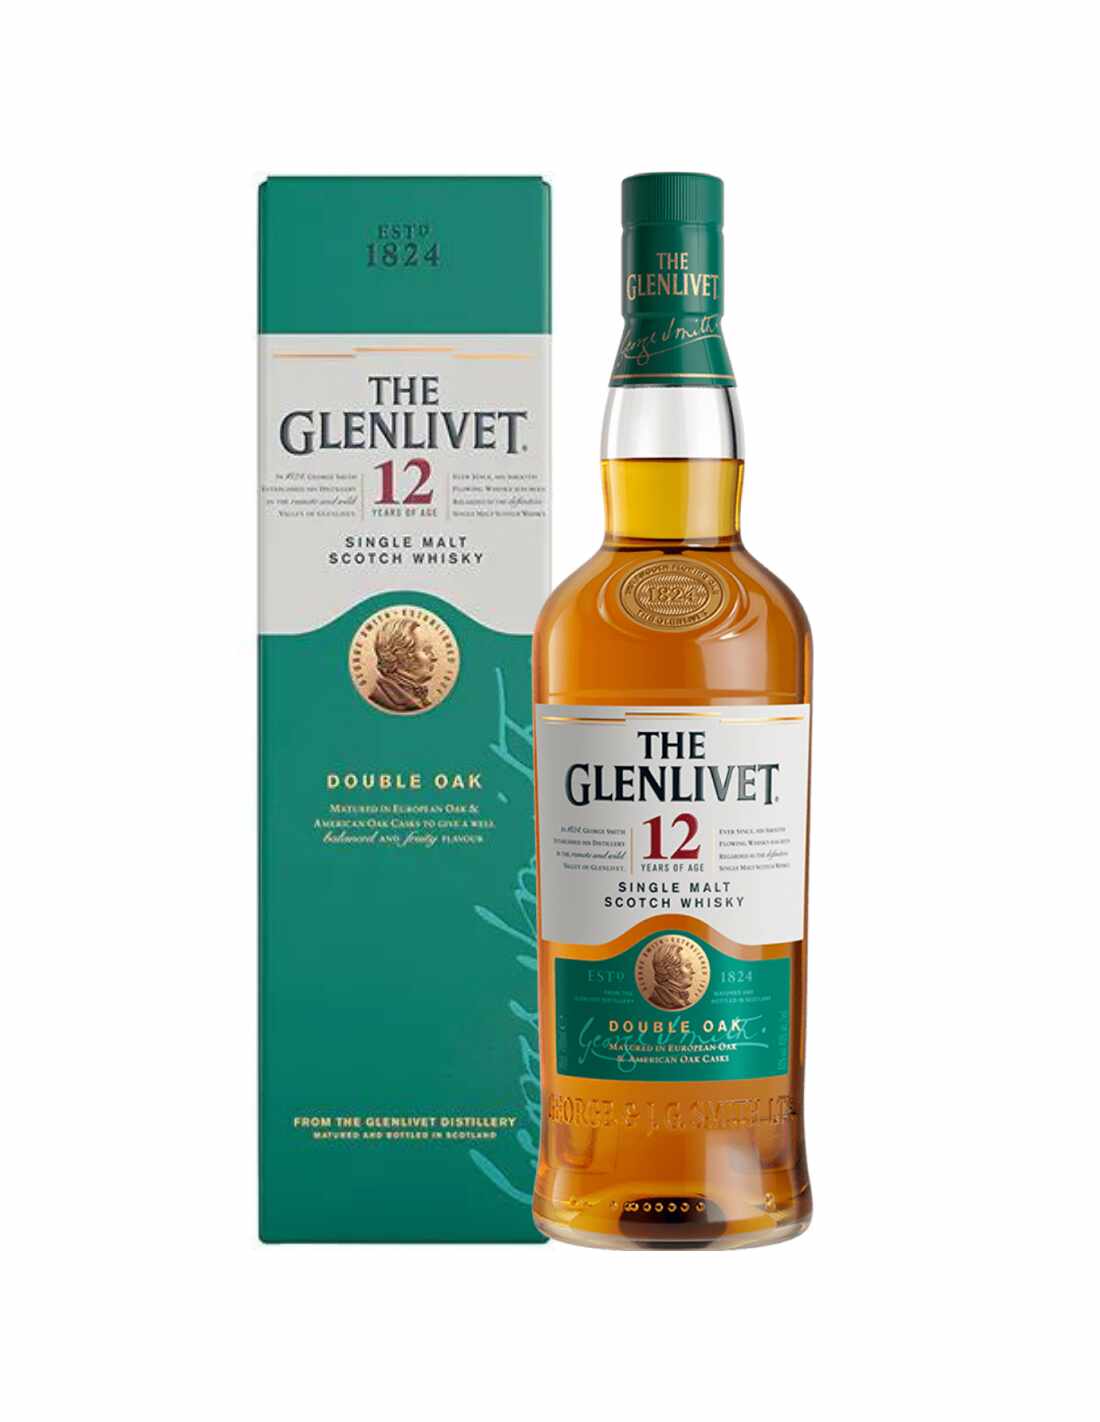 Whisky The Glenlivet 12 Years Double Oak, 0.7L, 40% alc., Scotia